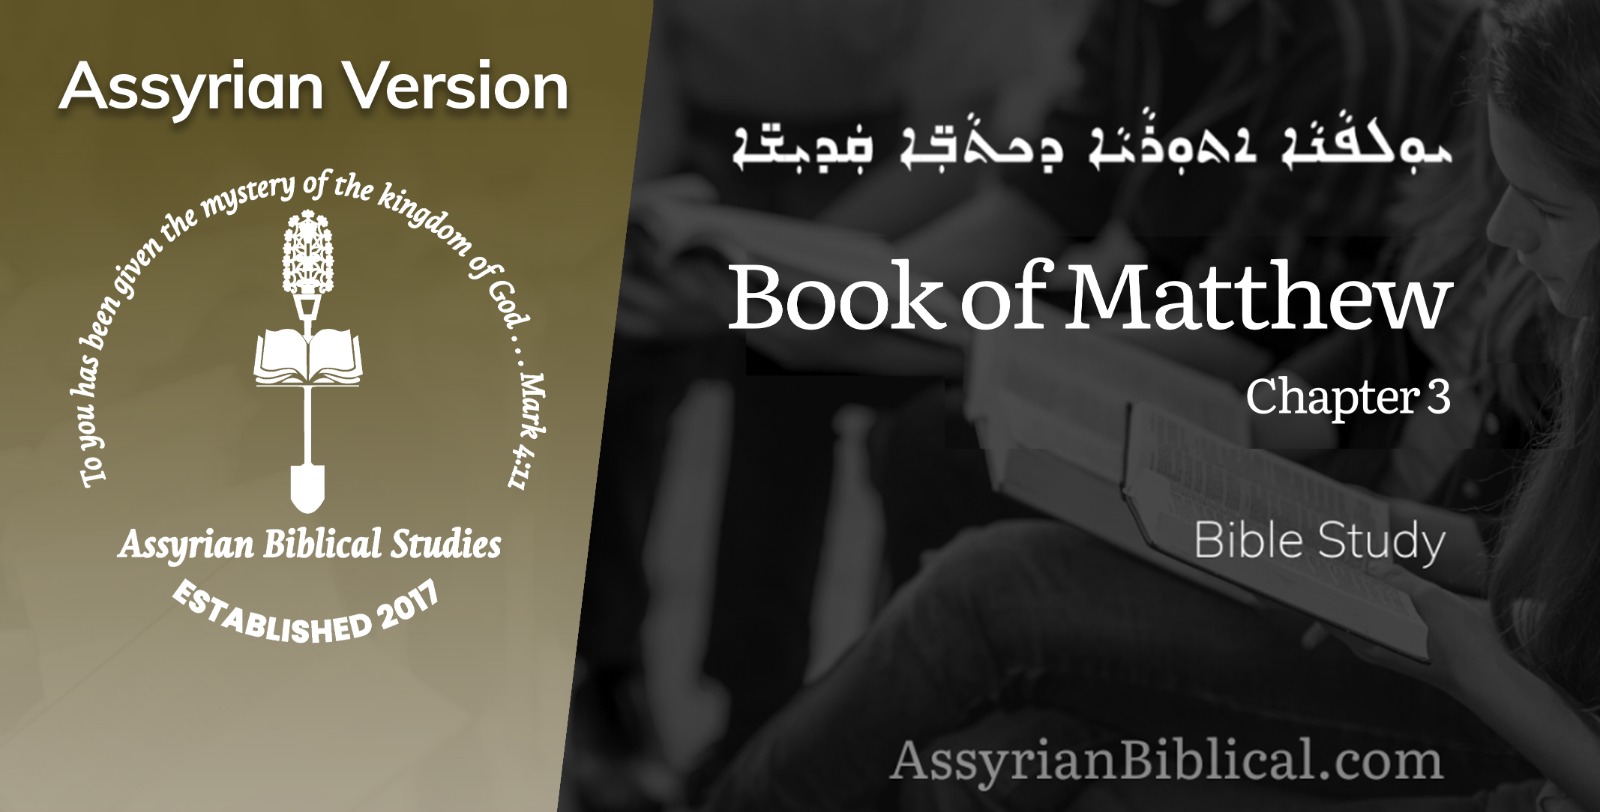 Image of video thumbnail for Book of Mathew Chapter 3 in Assyrian